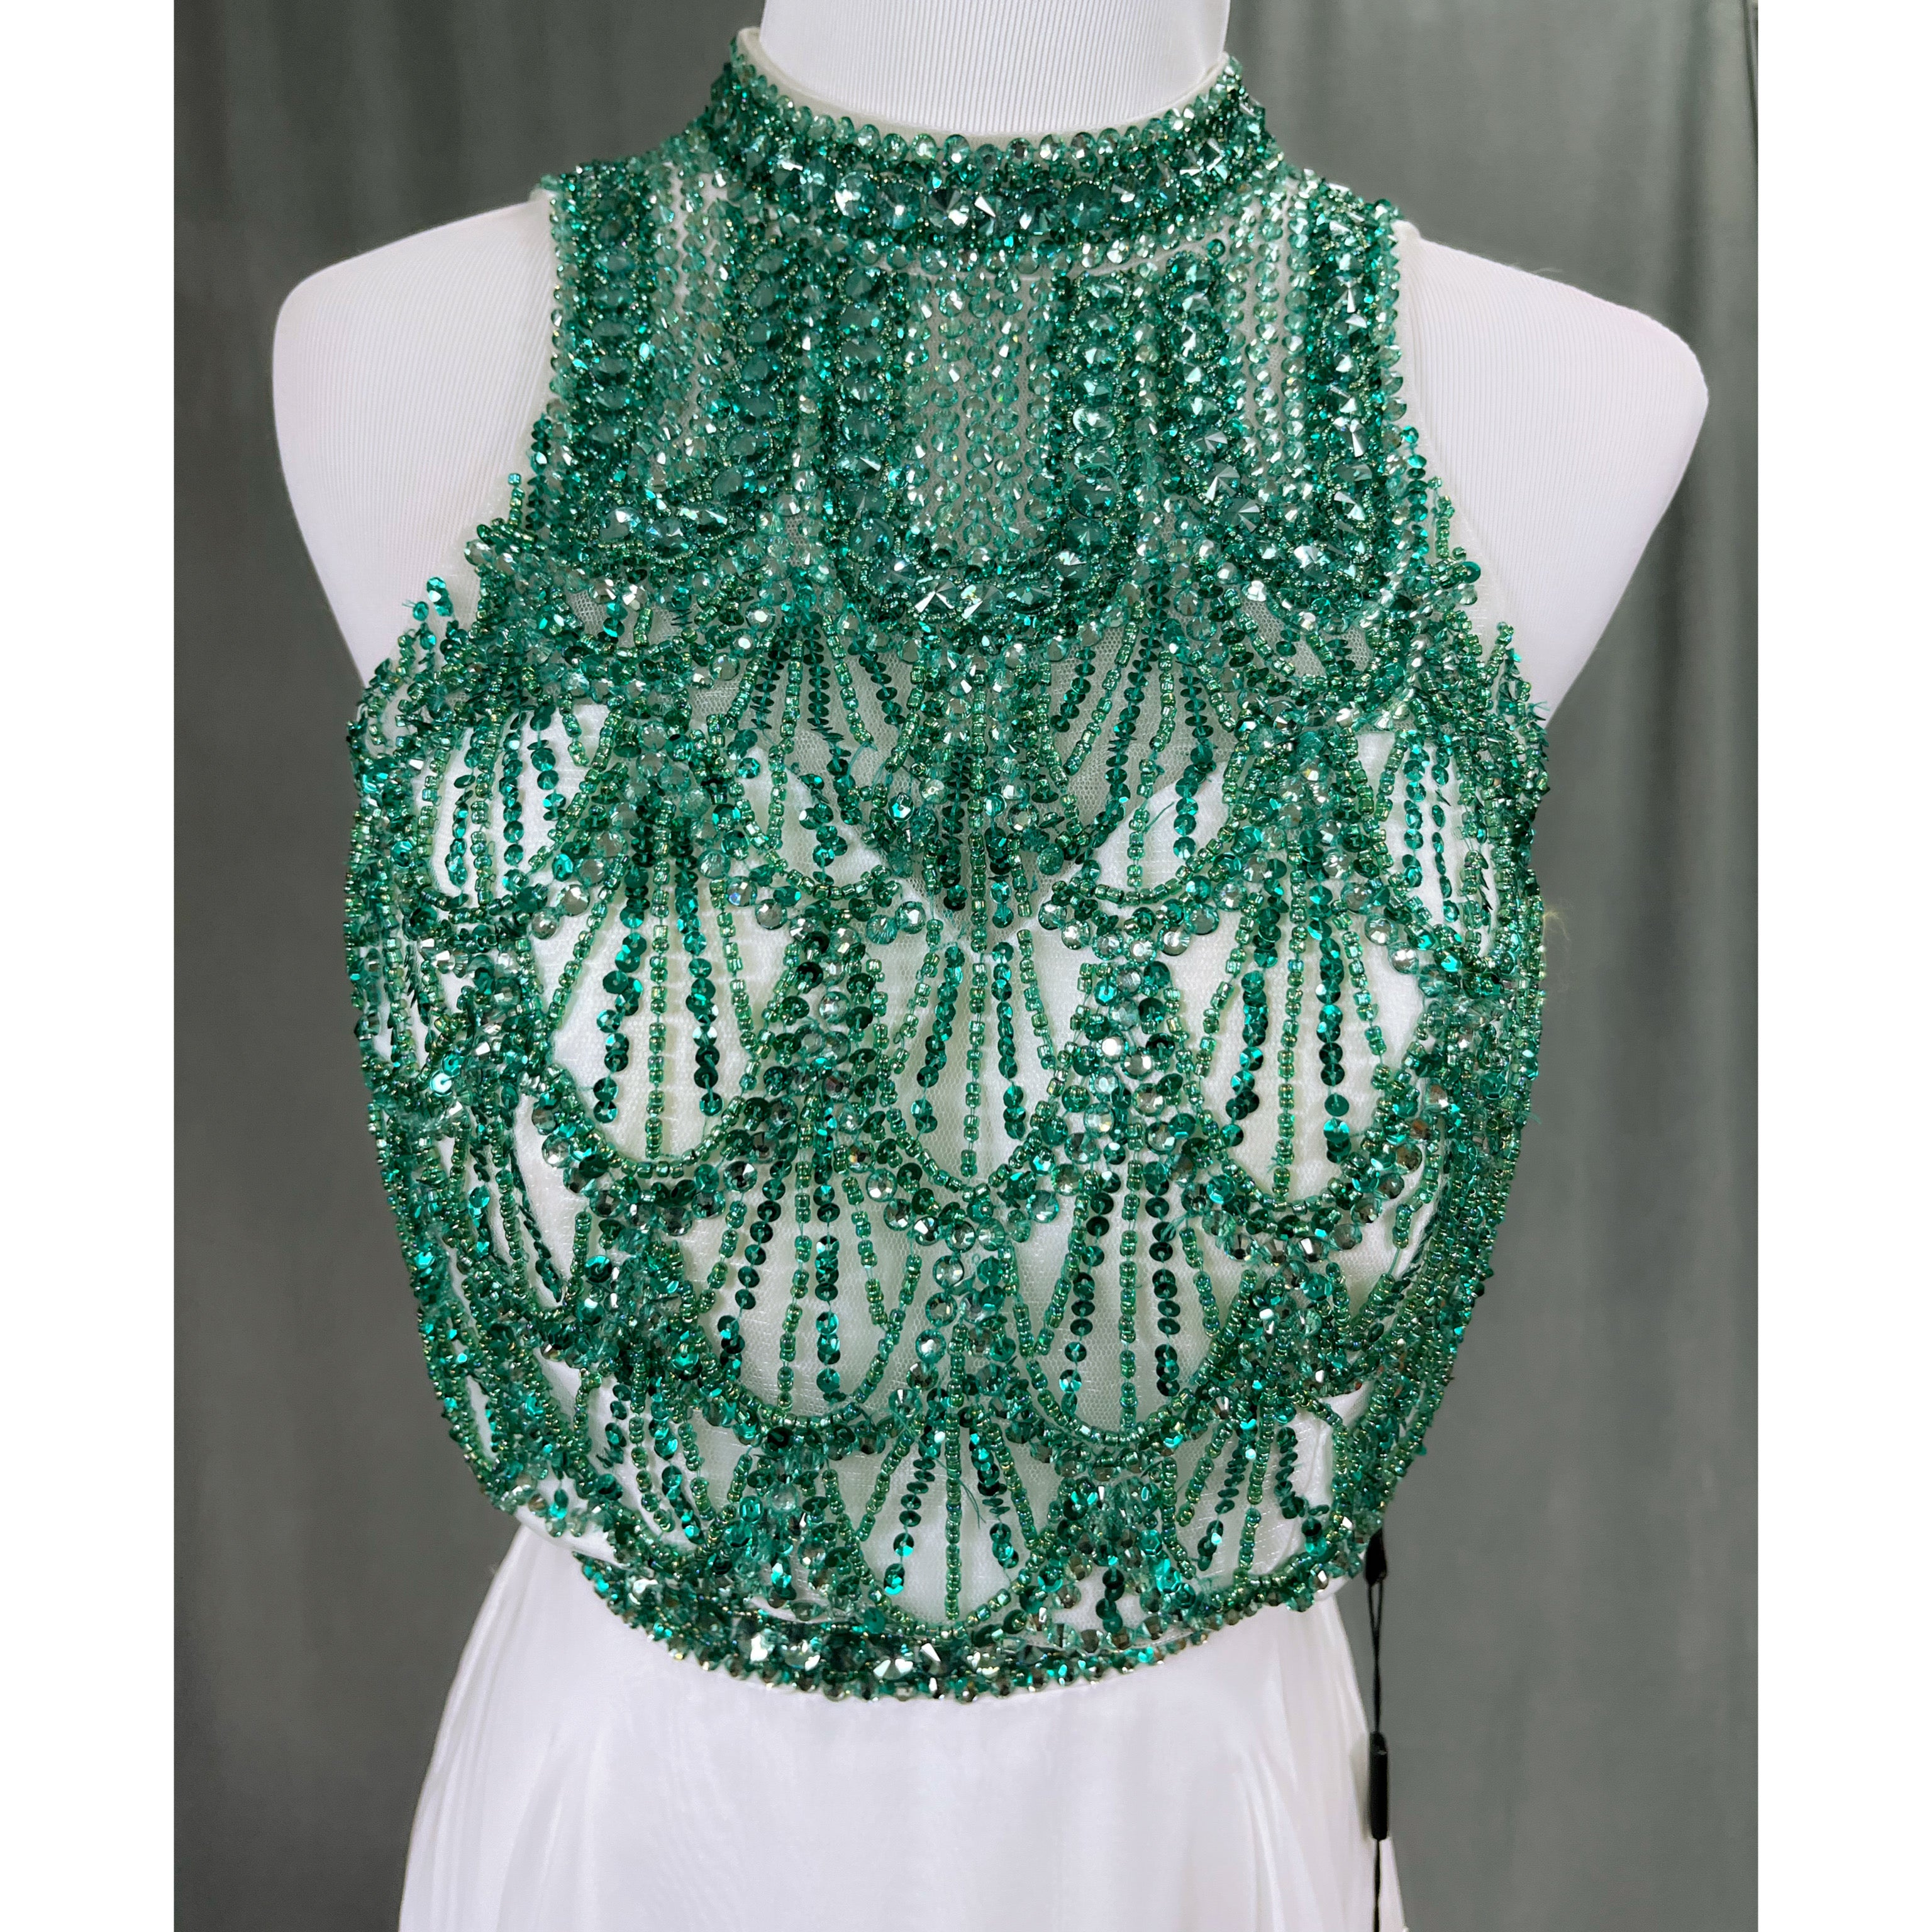 Milano white & emerald dress, size 0, NEW WITH TAGS!